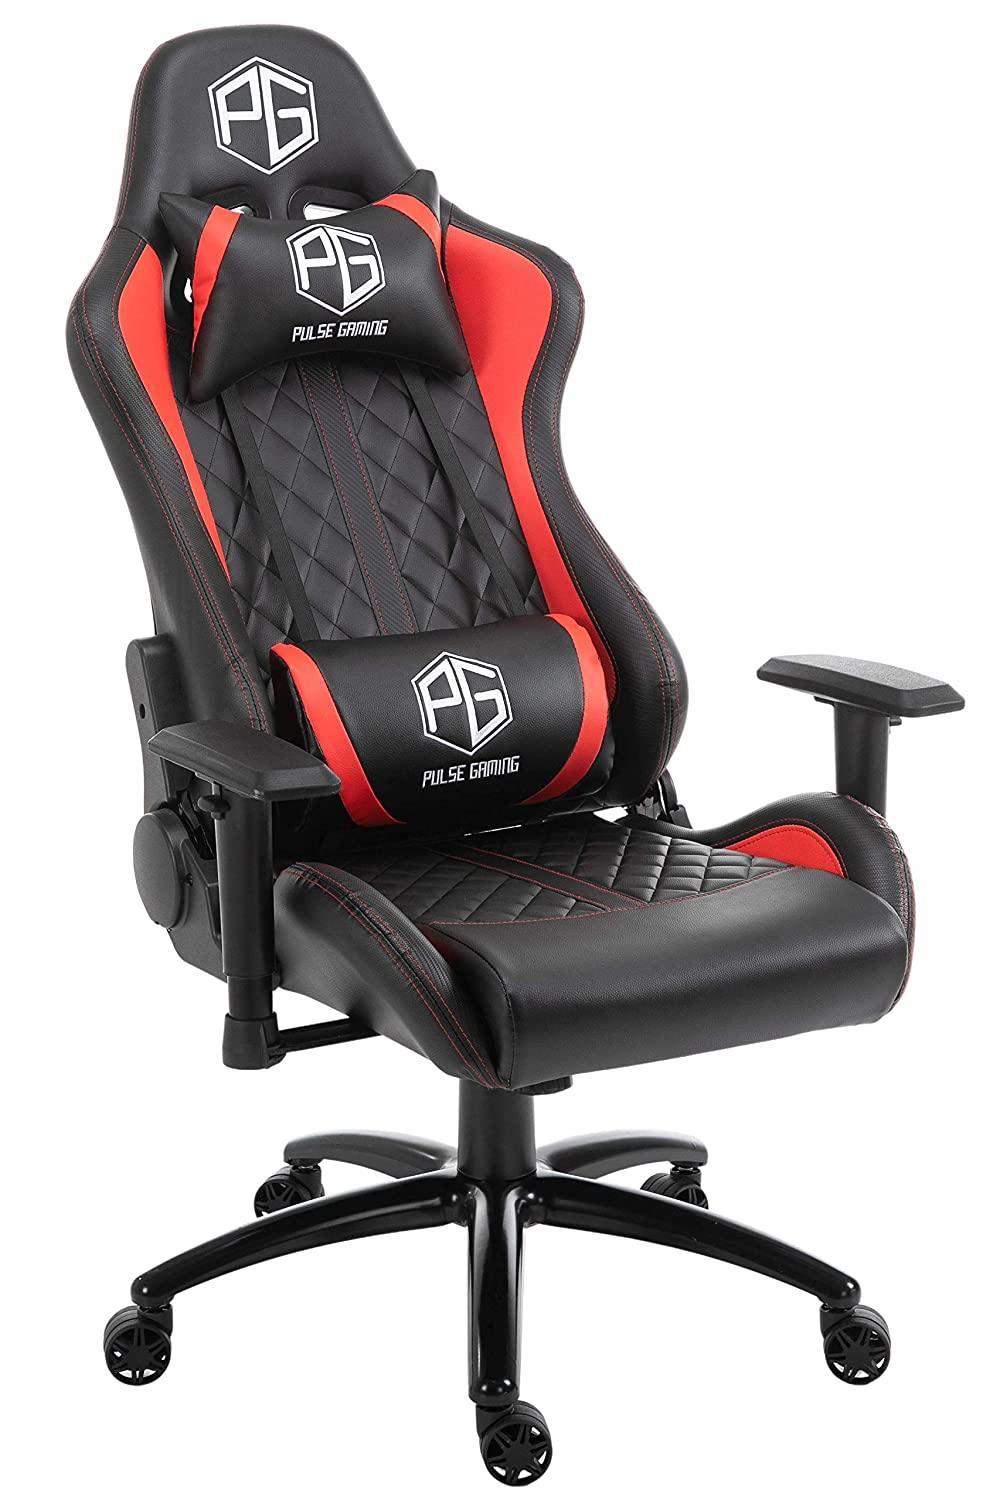 Pulse Gaming Racing Edition GT-07 Ergonomic Rolling , Arm Rest Gaming Chair with Metal Base (Black , Red) - Store For Gamers